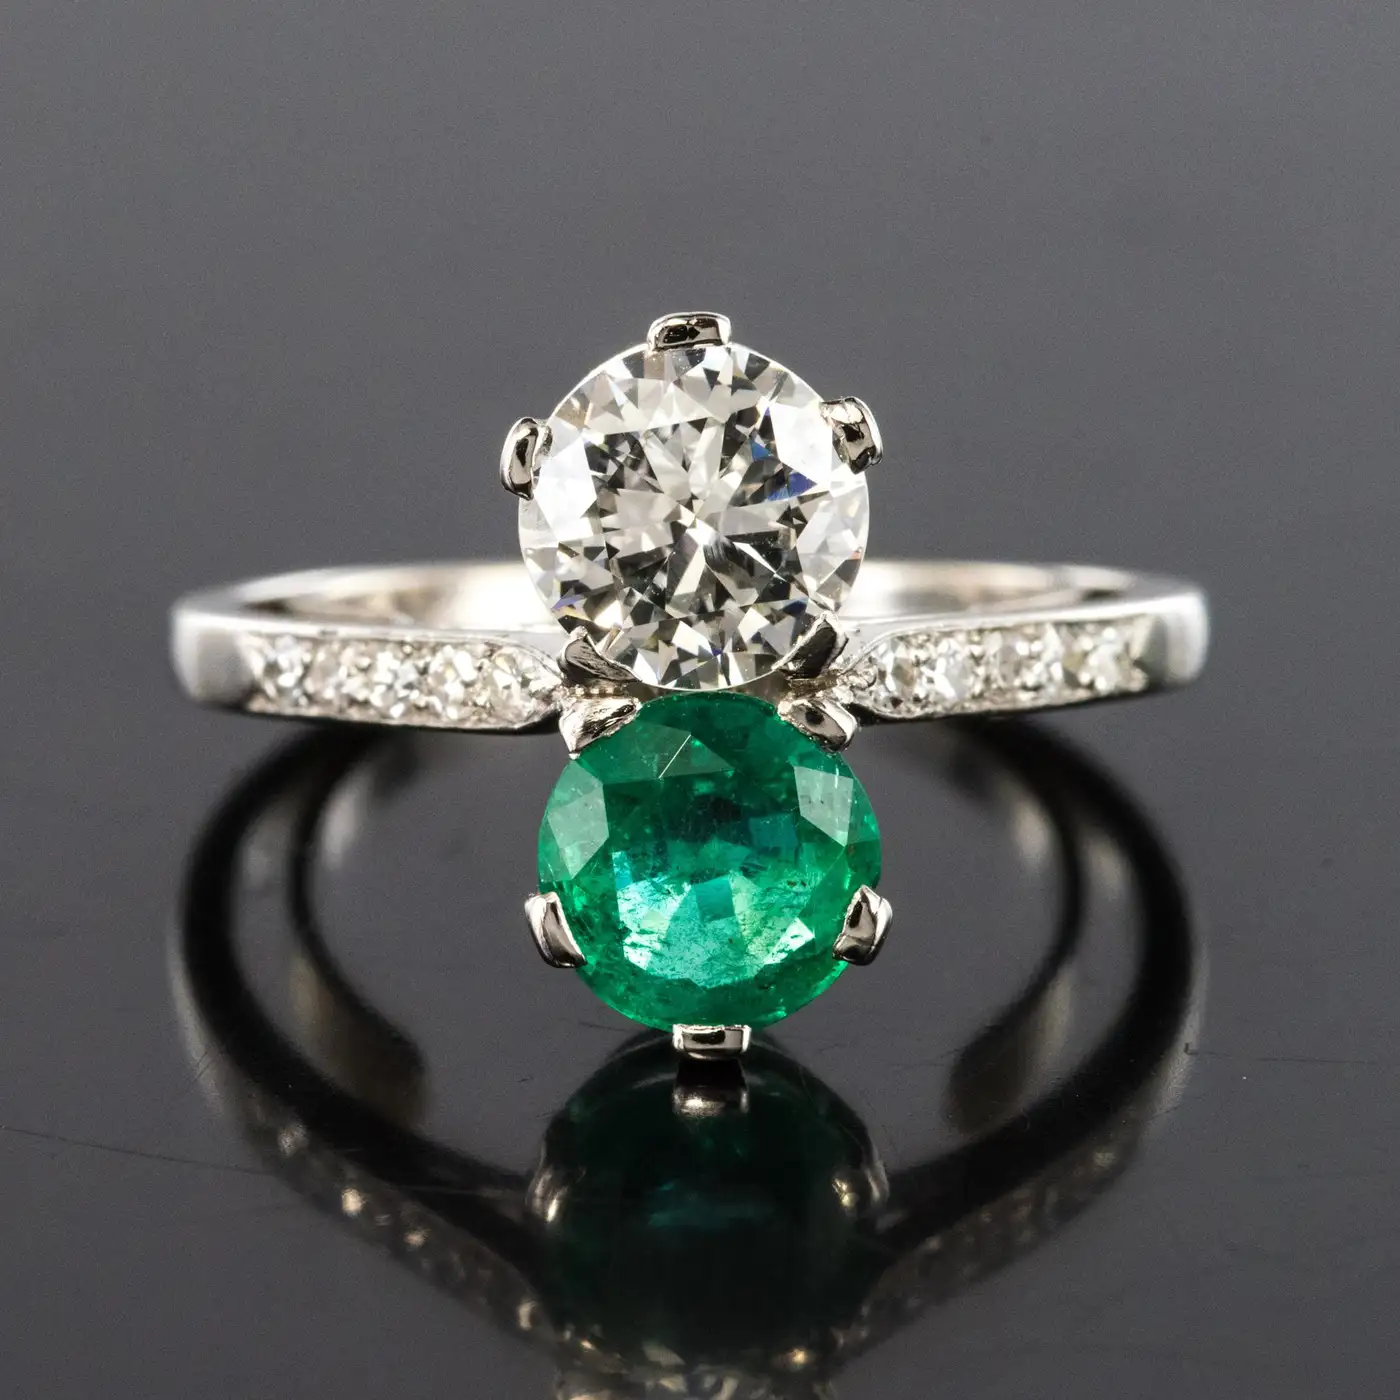 1930s-French-Platinum-Art-Deco-Emerald-Diamond-You-and-Me-Ring-5.webp